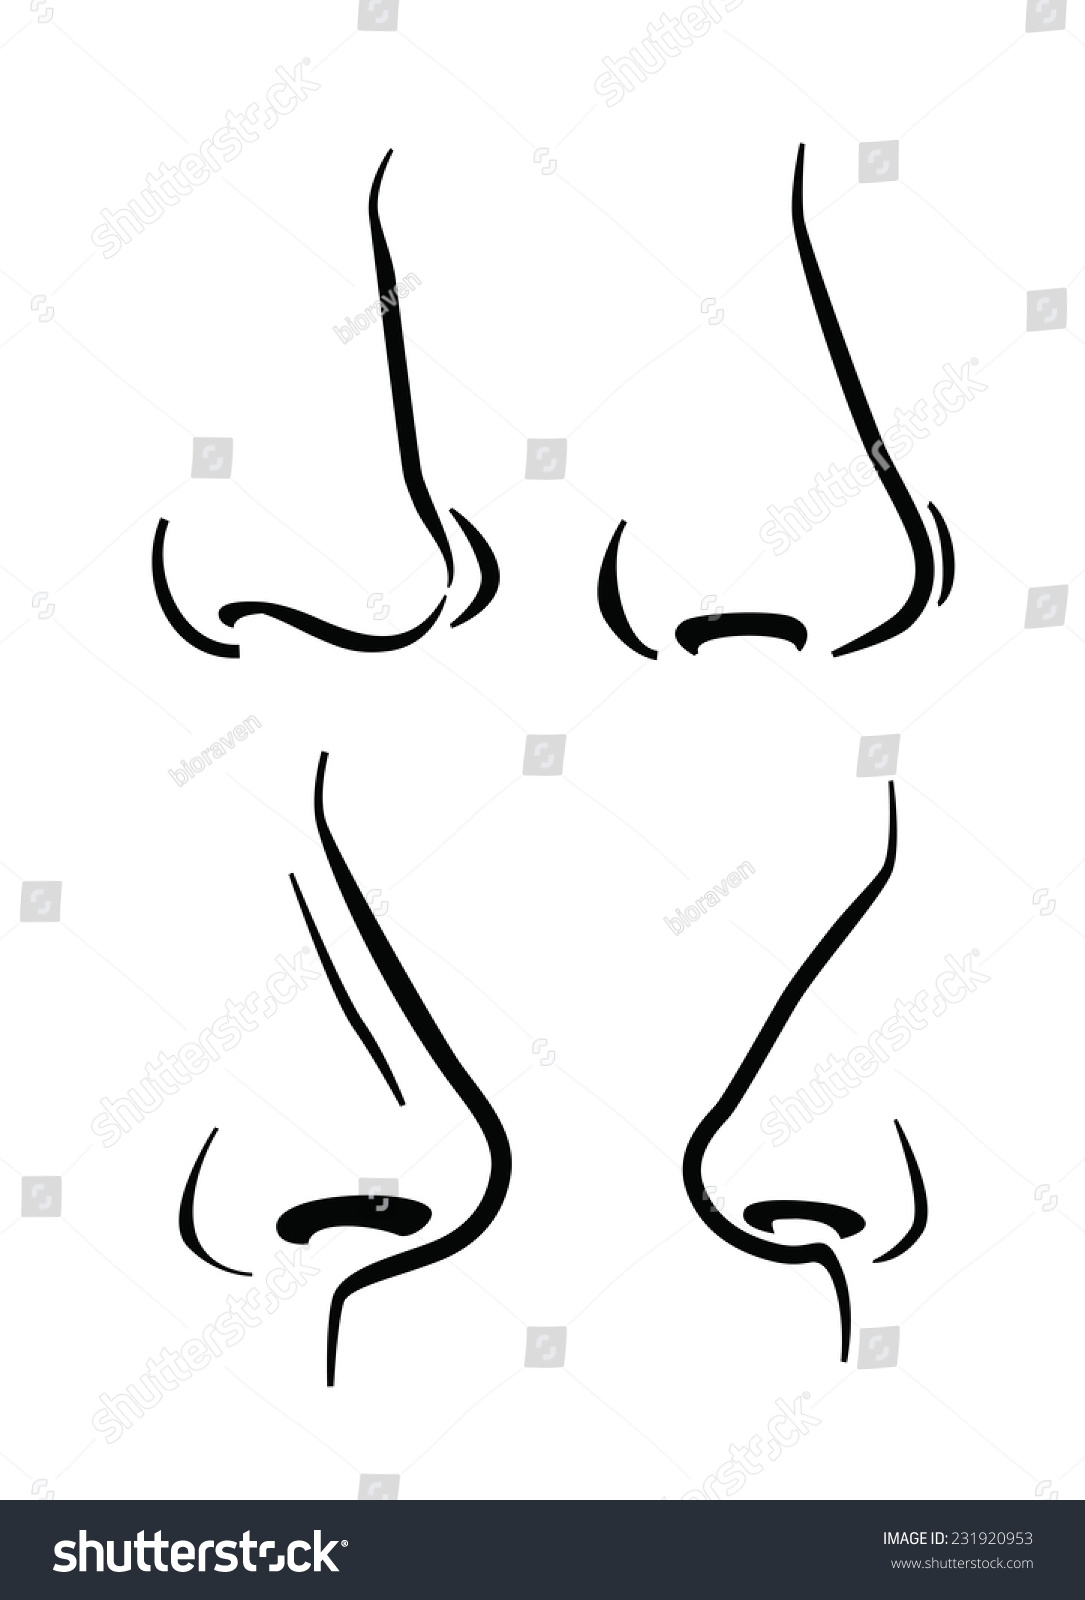 Vector Black Nose Icon On White Background - 231920953 : Shutterstock